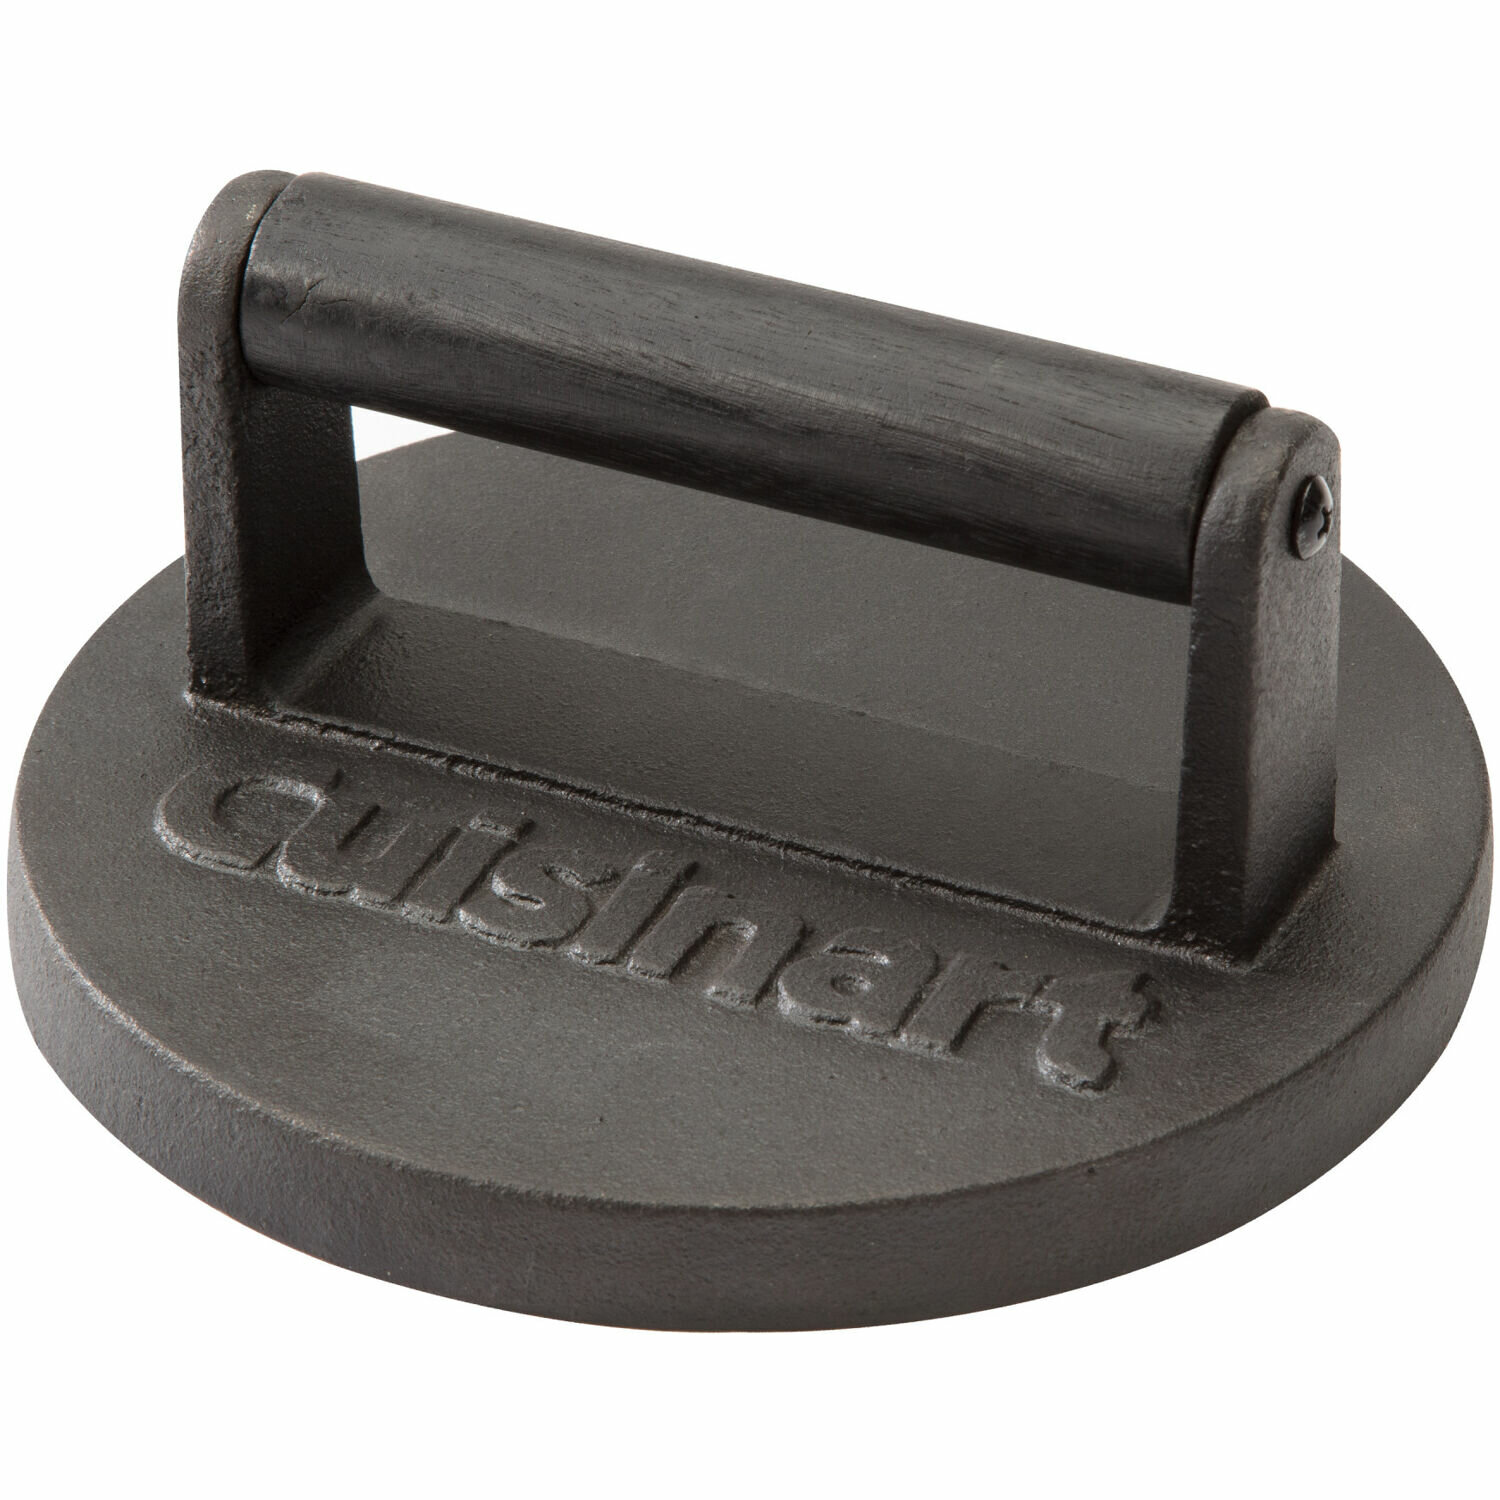 The Burger Iron | Burger Smasher | Pan-sized Smashed Burger Press for Ultimate Crust and Sear